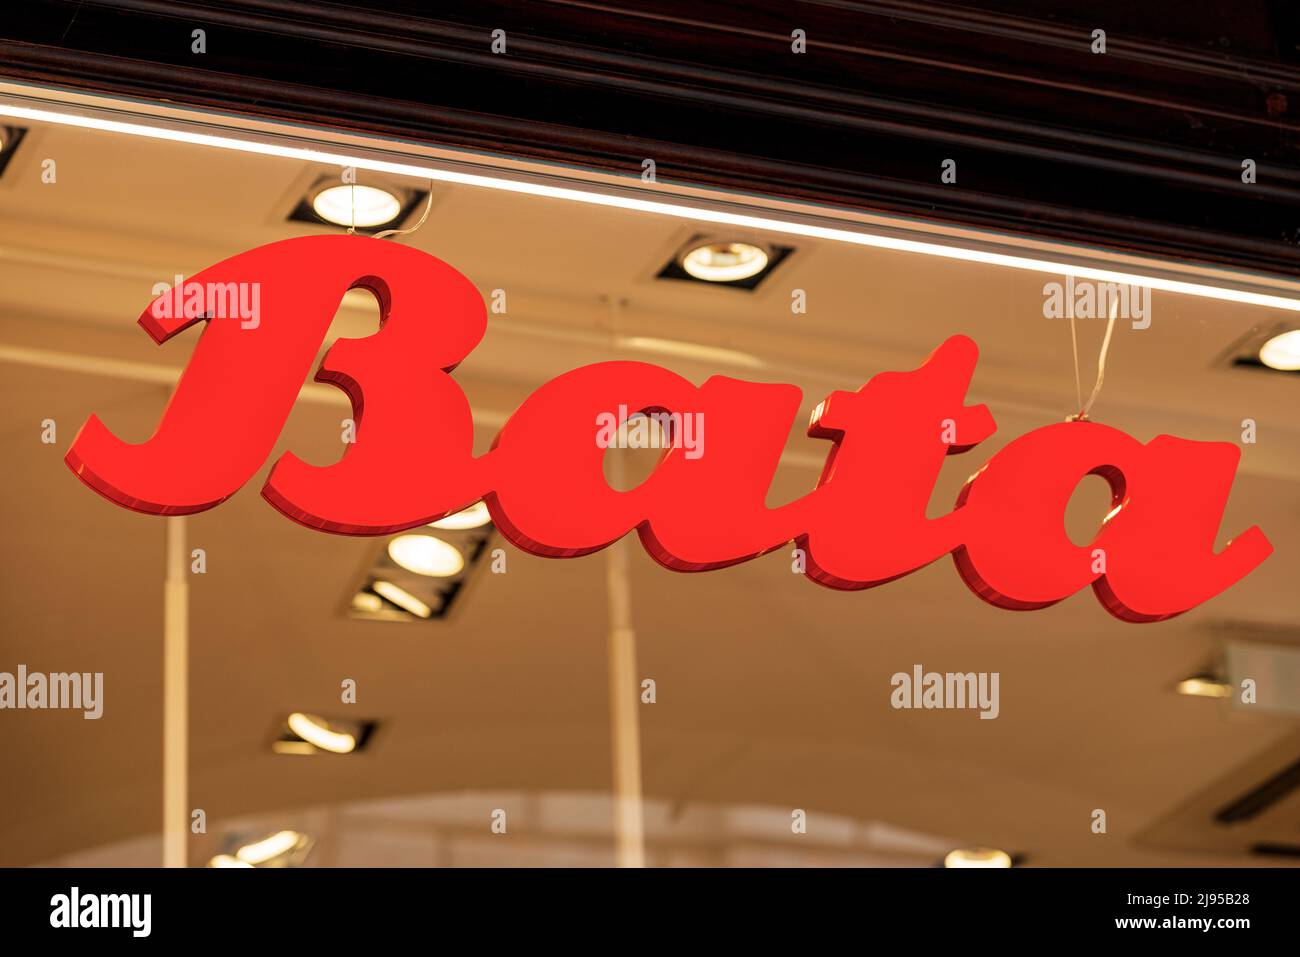 Close-up of the Bata corporate logo. Bata is the international shoe company with Czech roots currently headquartered in Lausanne, Switzerland. Stock Photo